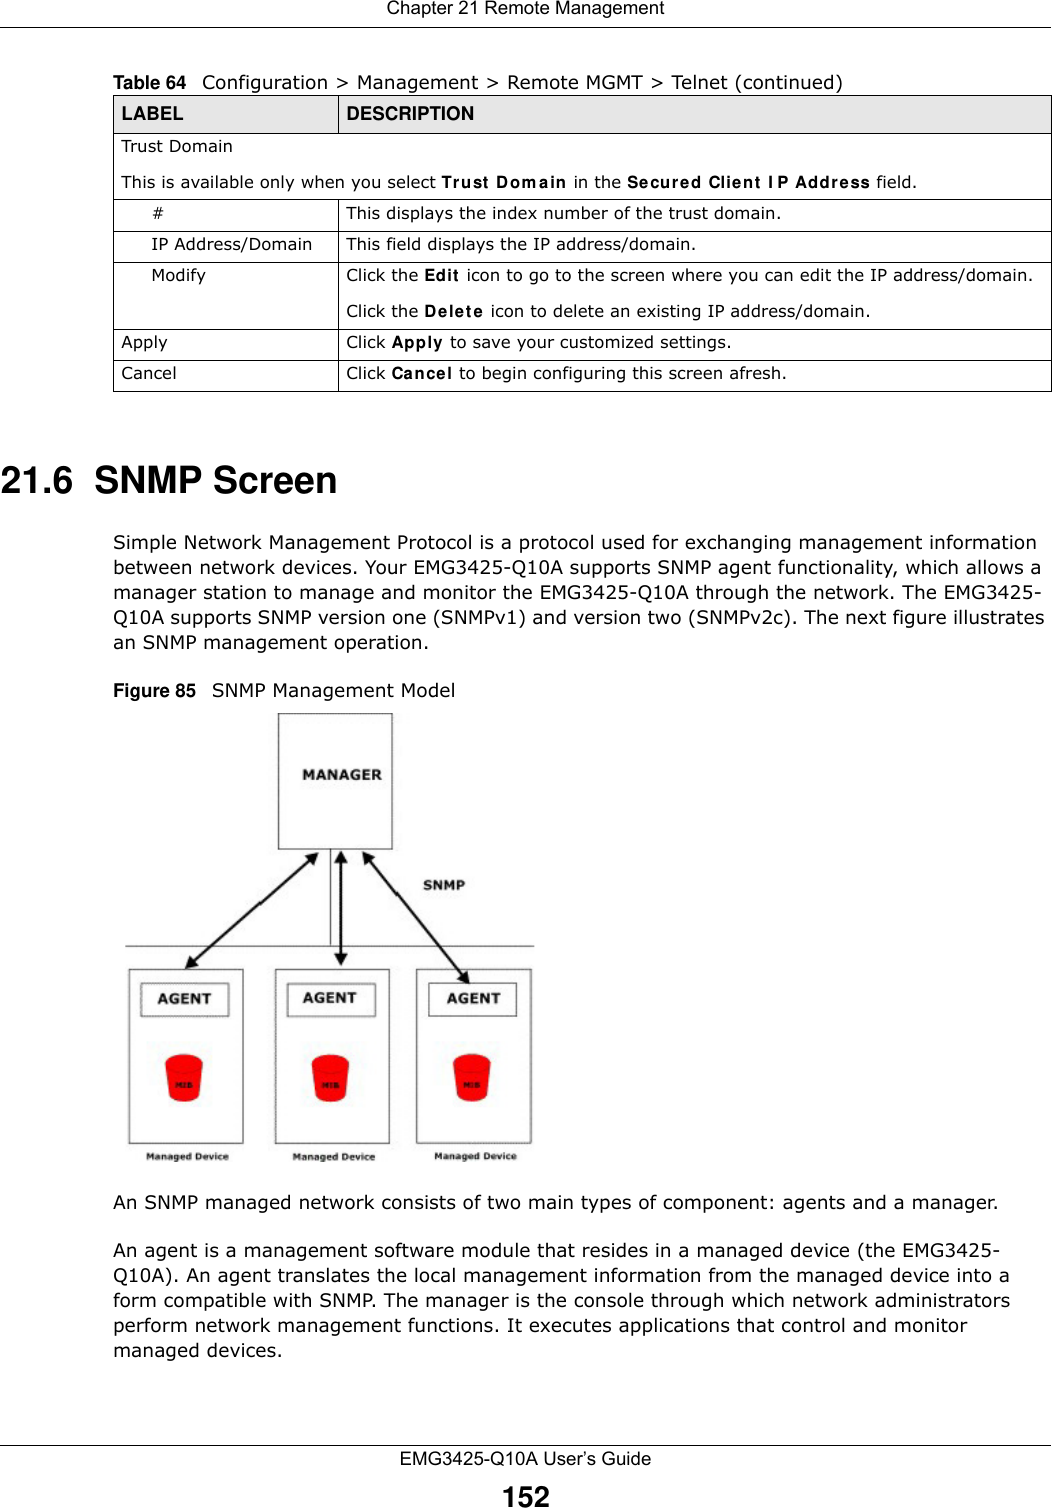 Chapter 21 Remote ManagementEMG3425-Q10A User’s Guide15221.6  SNMP ScreenSimple Network Management Protocol is a protocol used for exchanging management information between network devices. Your EMG3425-Q10A supports SNMP agent functionality, which allows a manager station to manage and monitor the EMG3425-Q10A through the network. The EMG3425-Q10A supports SNMP version one (SNMPv1) and version two (SNMPv2c). The next figure illustrates an SNMP management operation.Figure 85   SNMP Management ModelAn SNMP managed network consists of two main types of component: agents and a manager. An agent is a management software module that resides in a managed device (the EMG3425-Q10A). An agent translates the local management information from the managed device into a form compatible with SNMP. The manager is the console through which network administrators perform network management functions. It executes applications that control and monitor managed devices. Trust DomainThis is available only when you select Trust  Dom ain in the Se cured Client  I P Address field.#This displays the index number of the trust domain.IP Address/Domain This field displays the IP address/domain.Modify Click the Ed it  icon to go to the screen where you can edit the IP address/domain.Click the D e let e  icon to delete an existing IP address/domain.Apply Click Apply  to save your customized settings. Cancel Click Cancel to begin configuring this screen afresh.Table 64   Configuration &gt; Management &gt; Remote MGMT &gt; Telnet (continued)LABEL DESCRIPTION